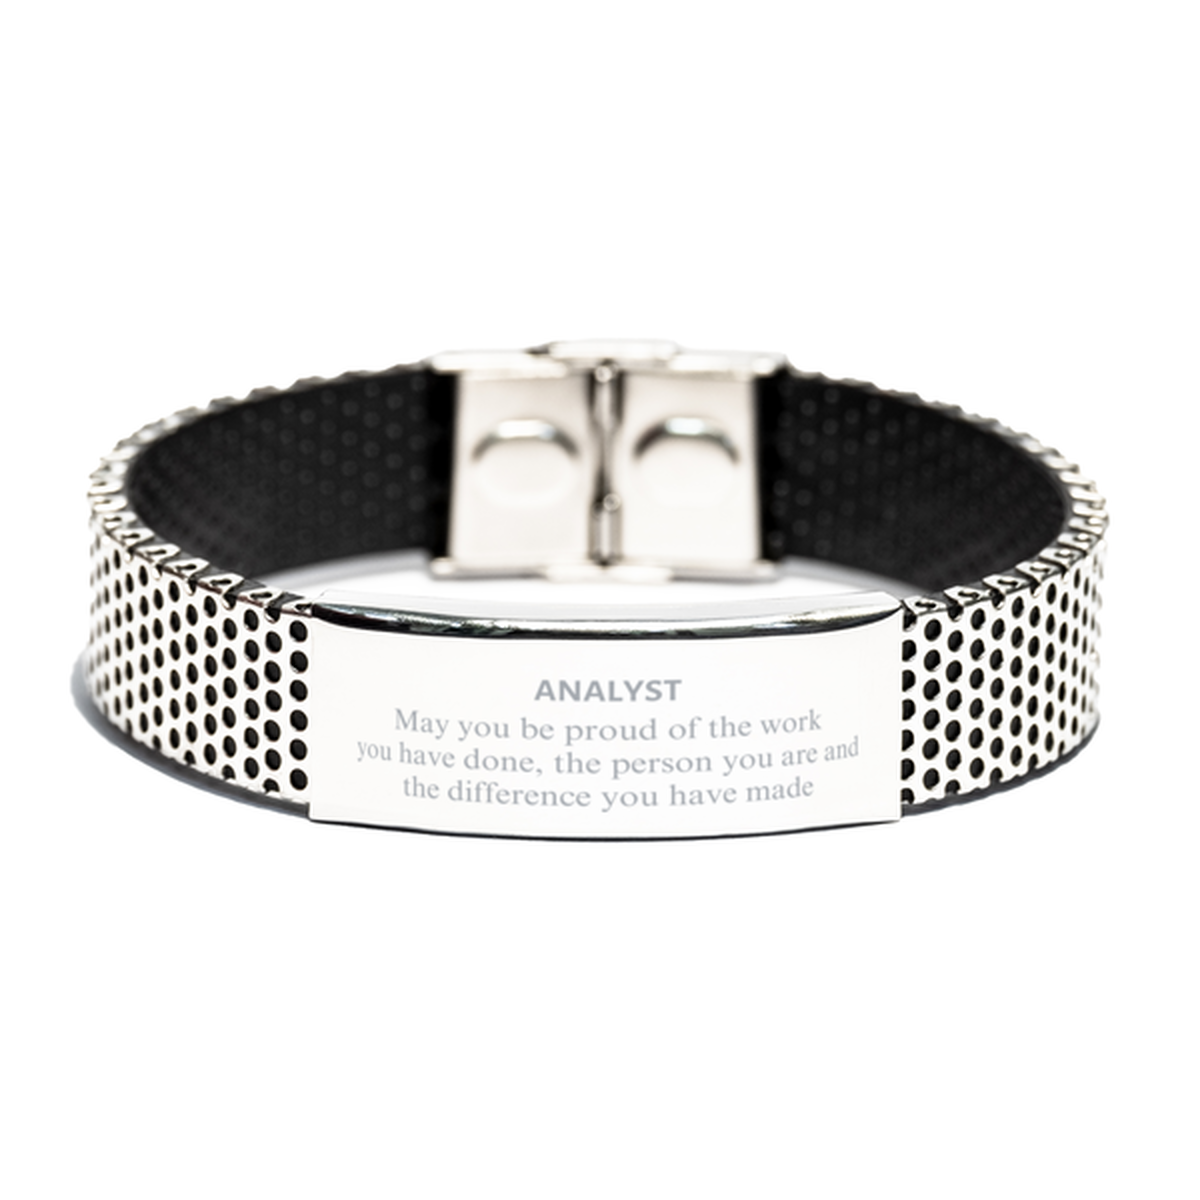 Analyst May you be proud of the work you have done, Retirement Analyst Stainless Steel Bracelet for Colleague Appreciation Gifts Amazing for Analyst